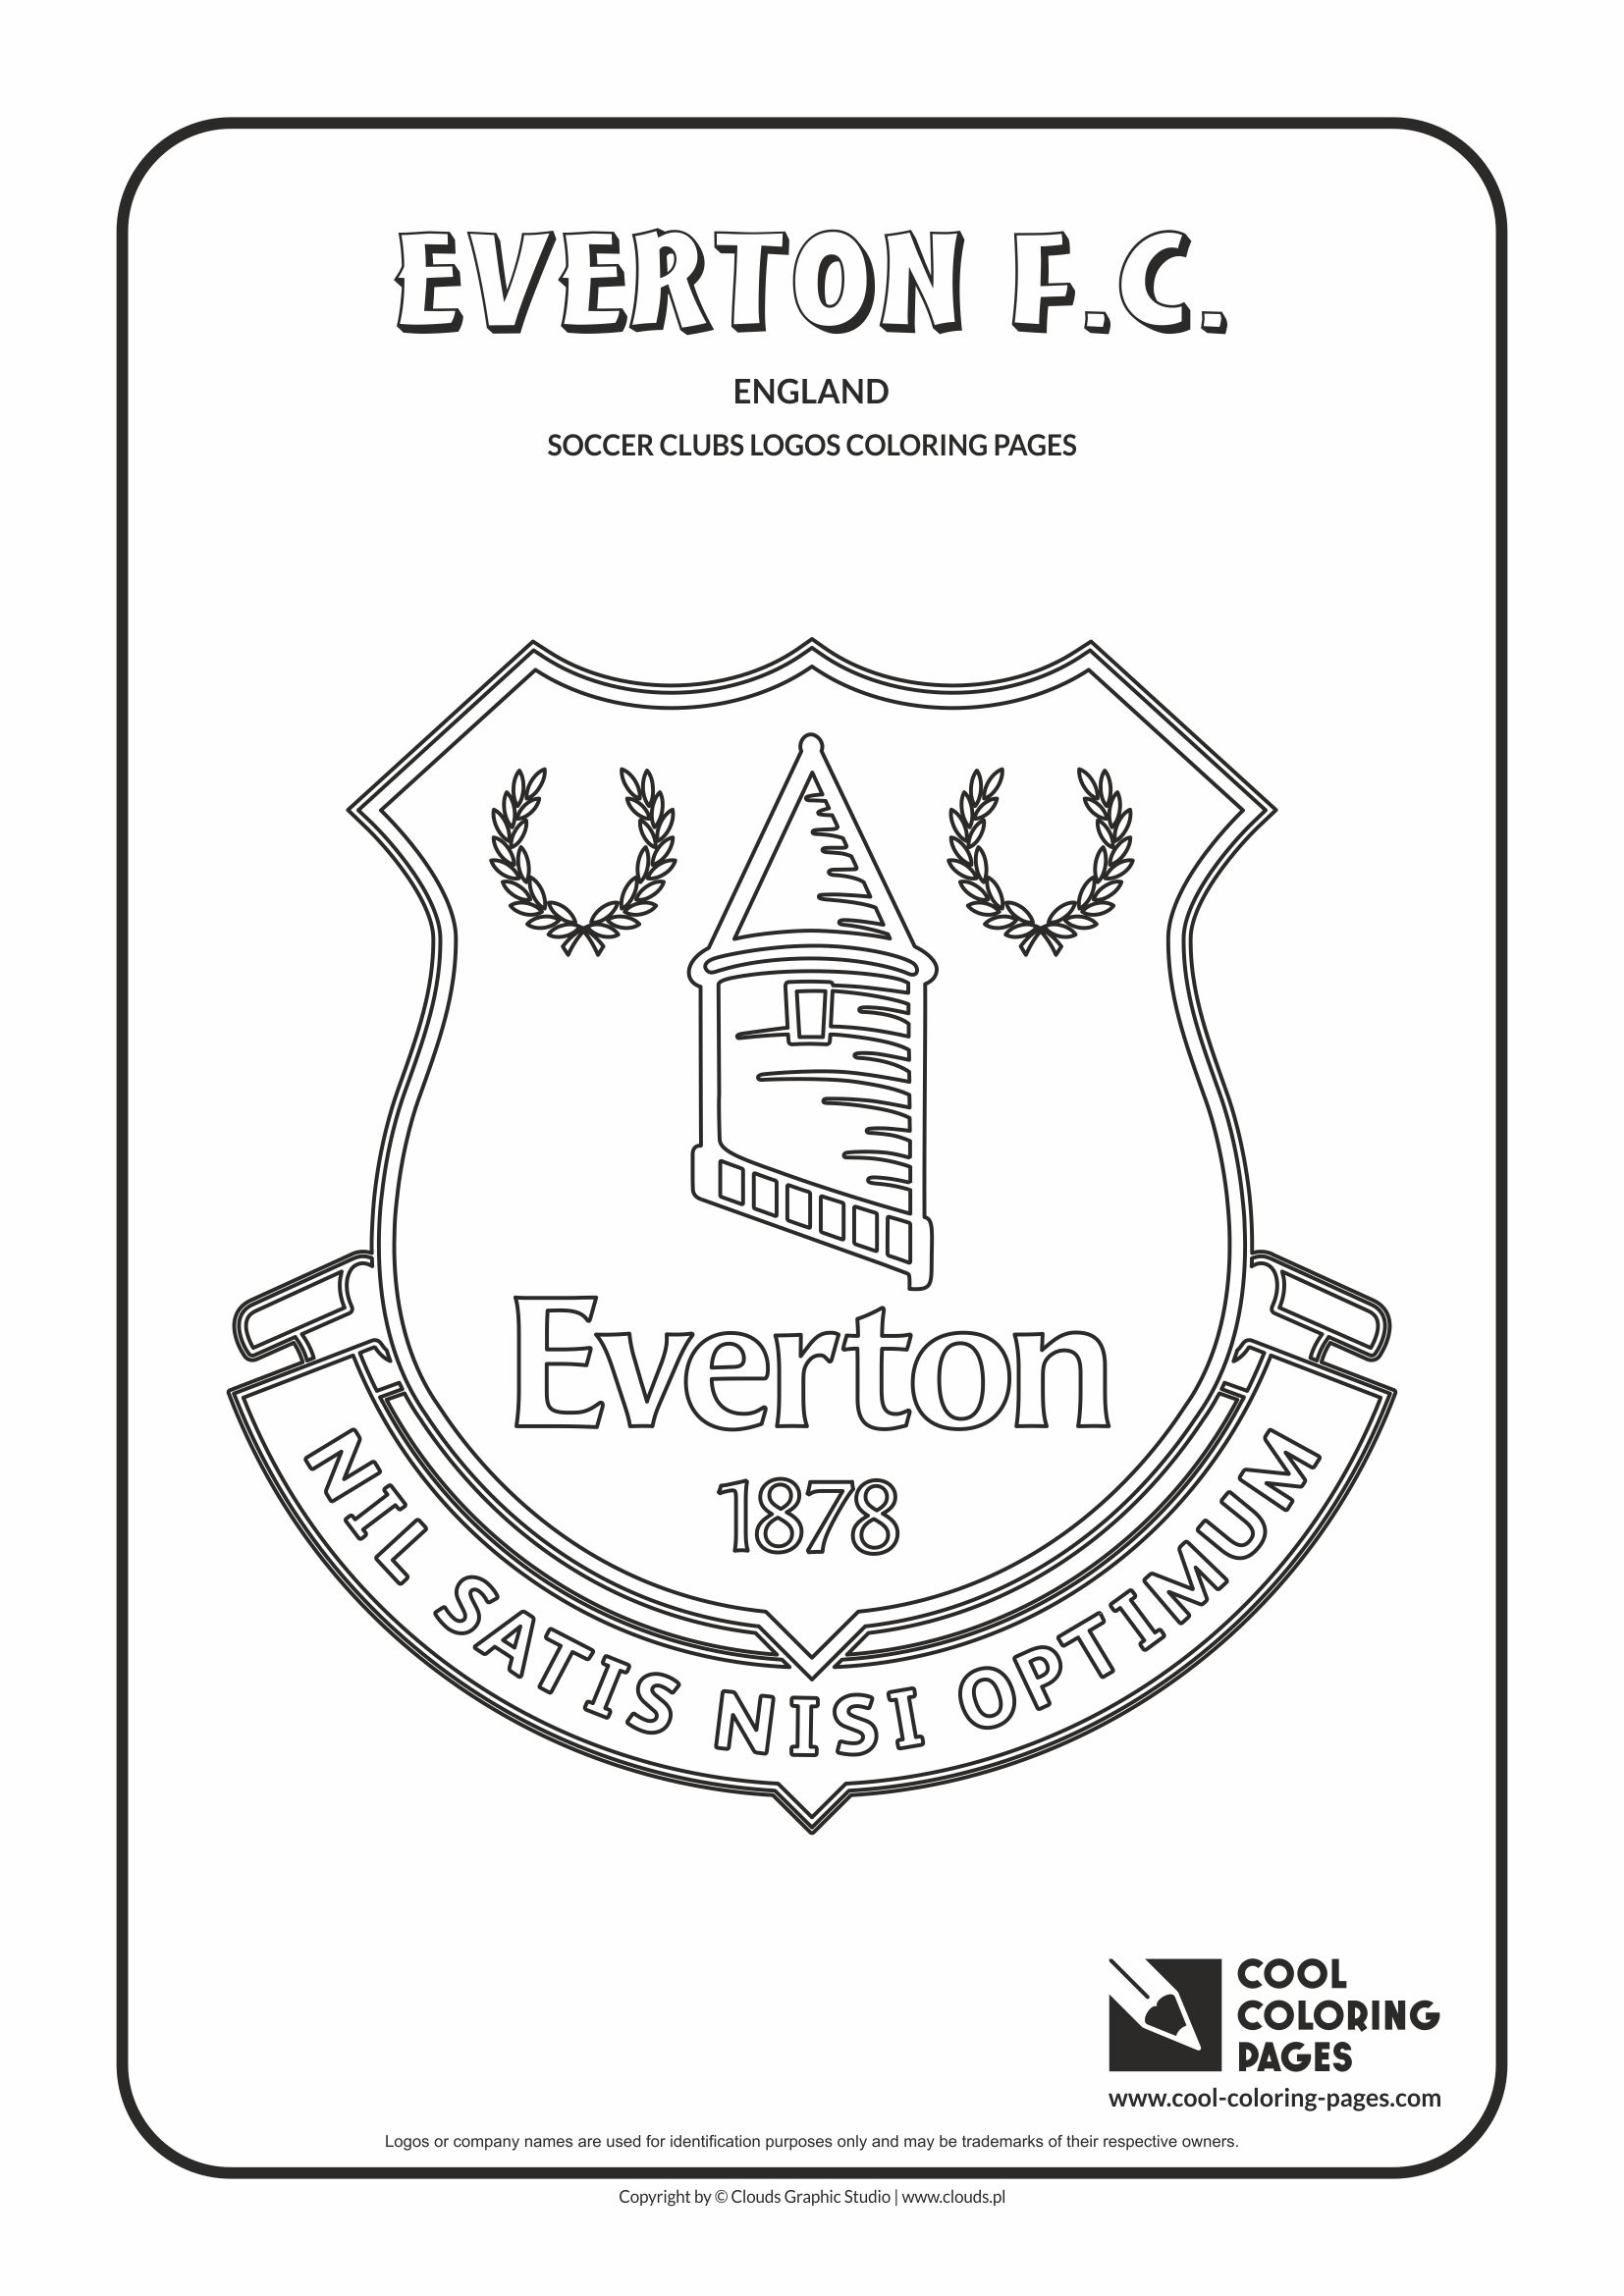 Download Cool Coloring Pages Soccer clubs logos - Cool Coloring ...